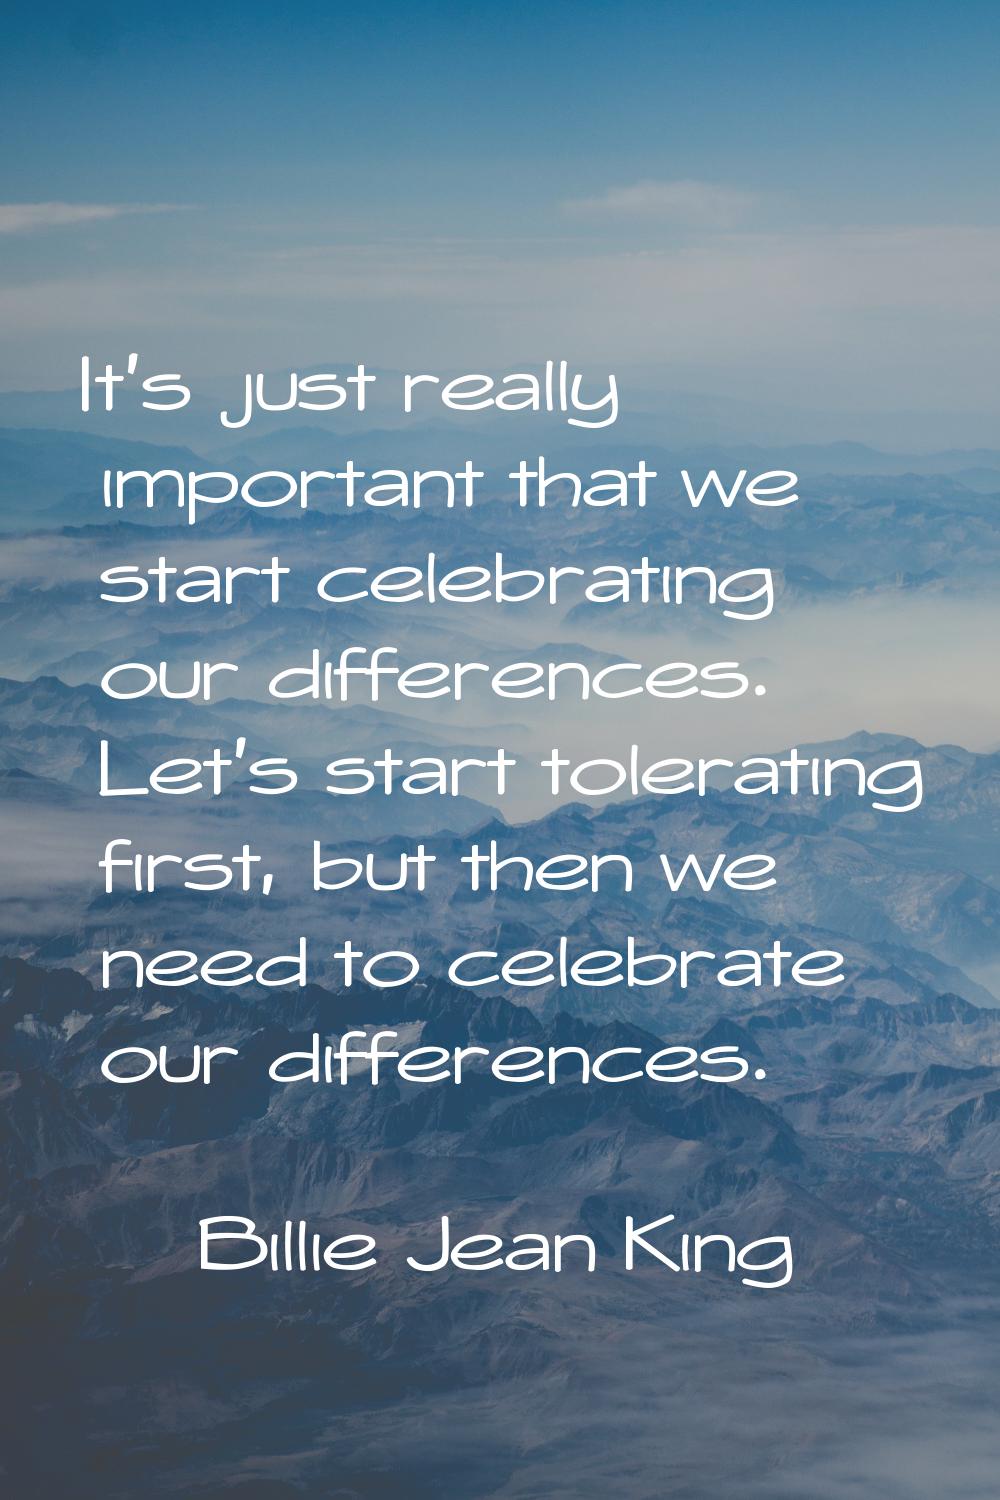 It's just really important that we start celebrating our differences. Let's start tolerating first,